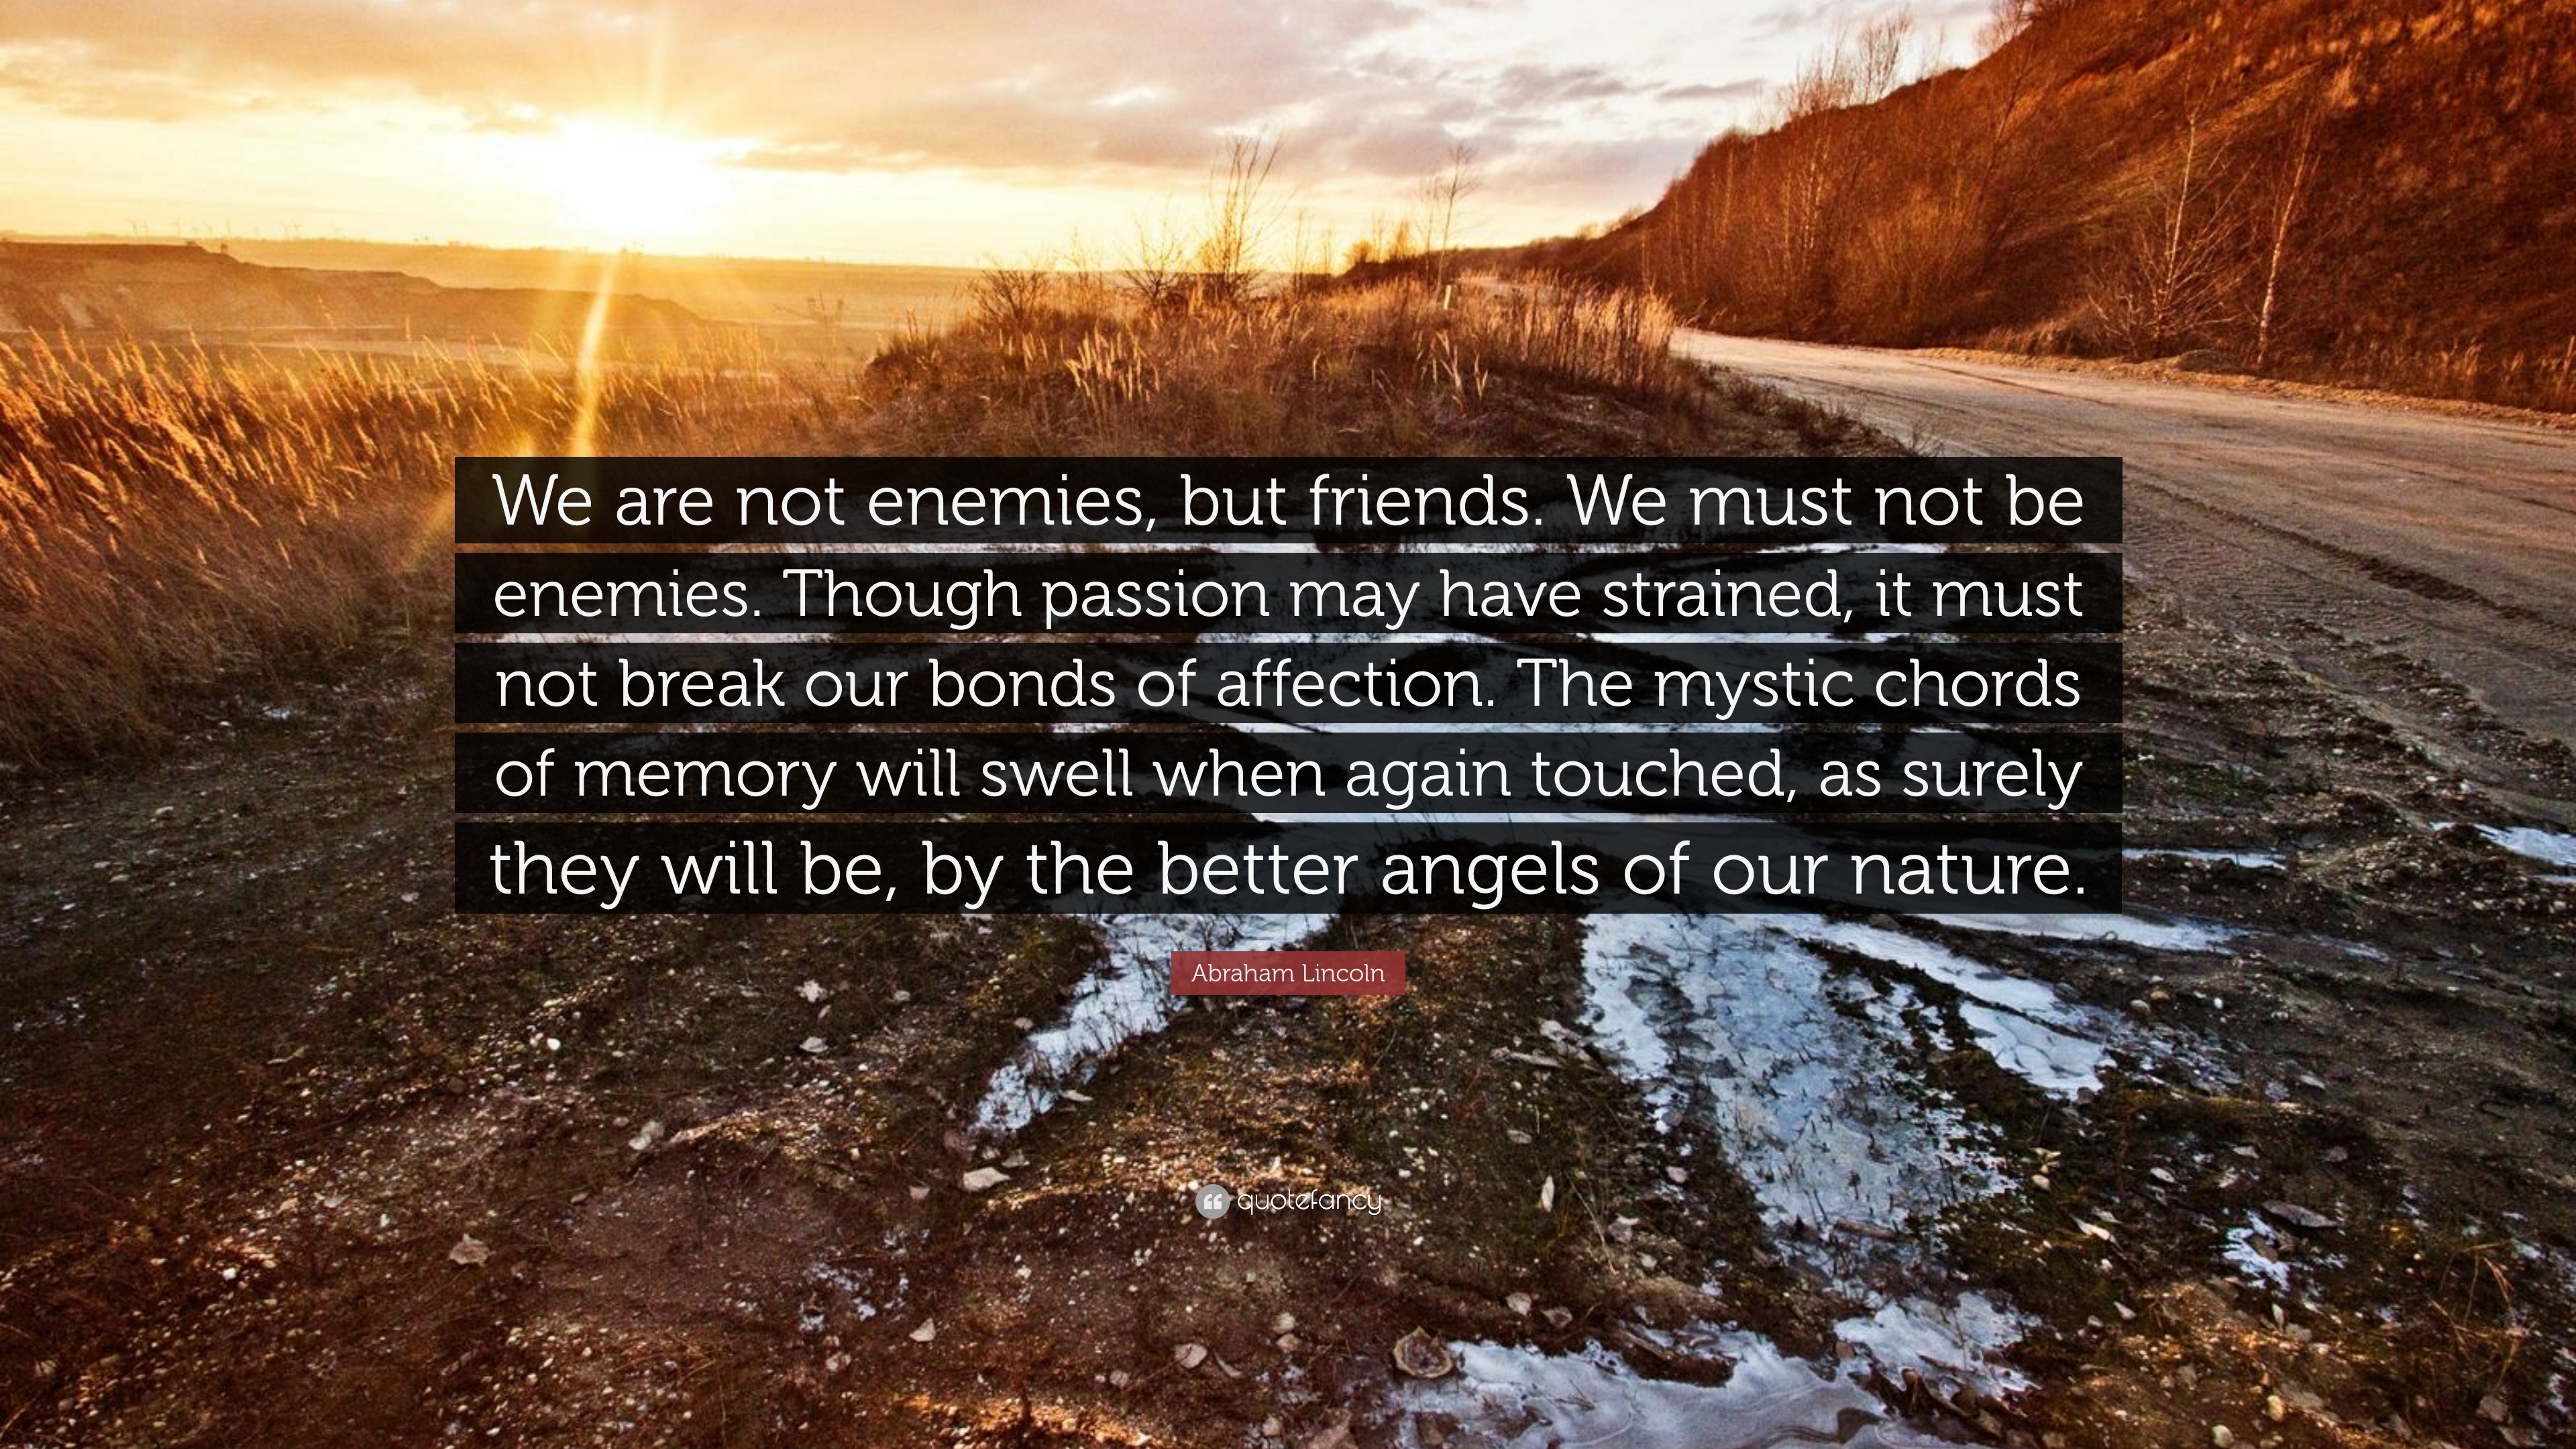 jord Distraktion Avl Abraham Lincoln Quote: “We are not enemies, but friends. We must not be  enemies. Though passion may have strained, it must not break our bonds o...”